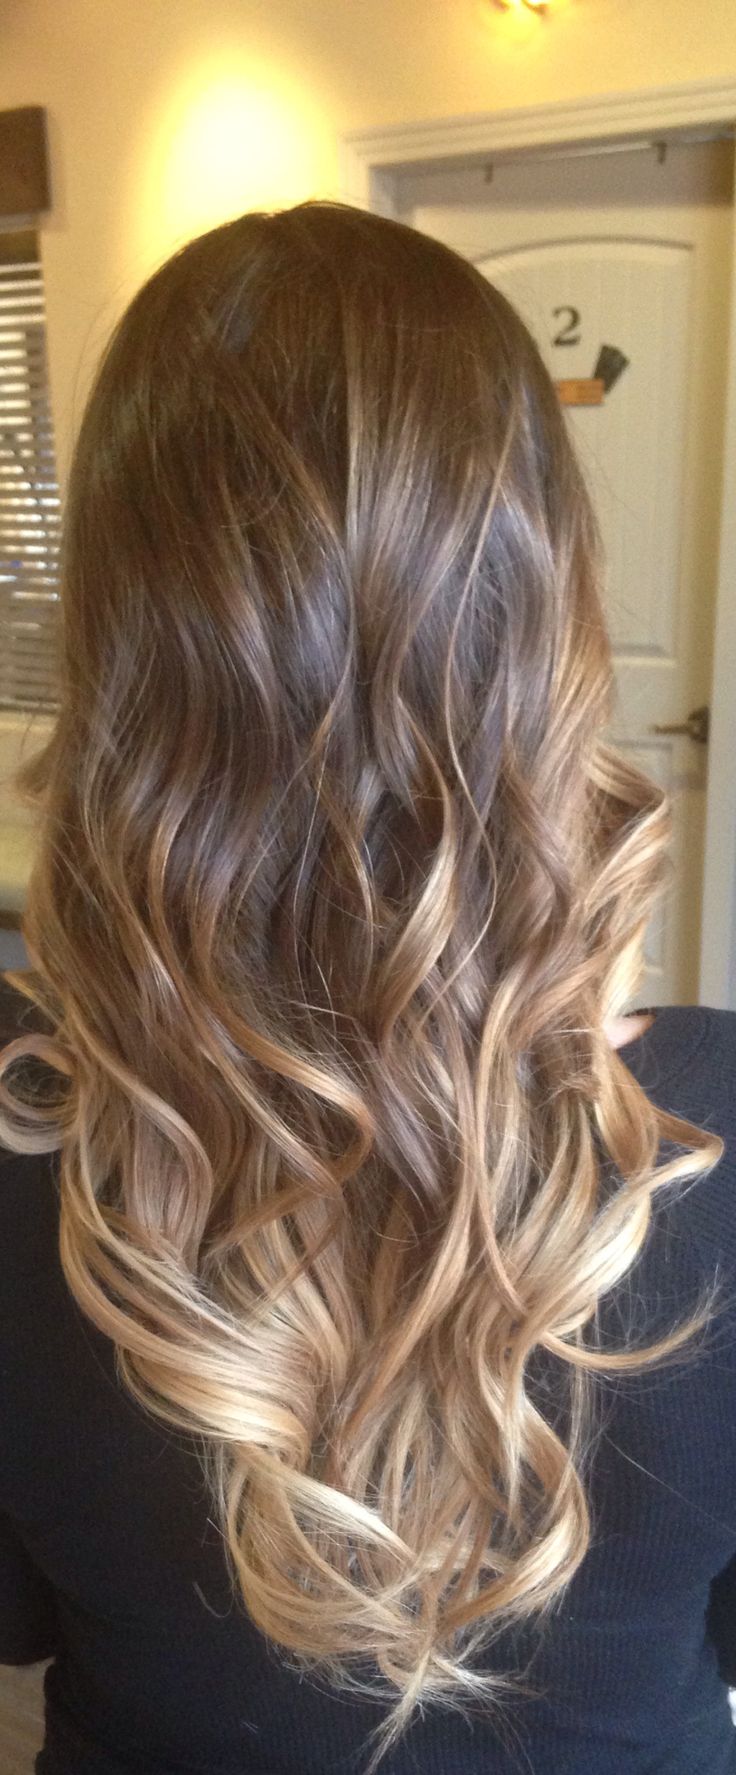 Ombre hair - The main reasons to get it